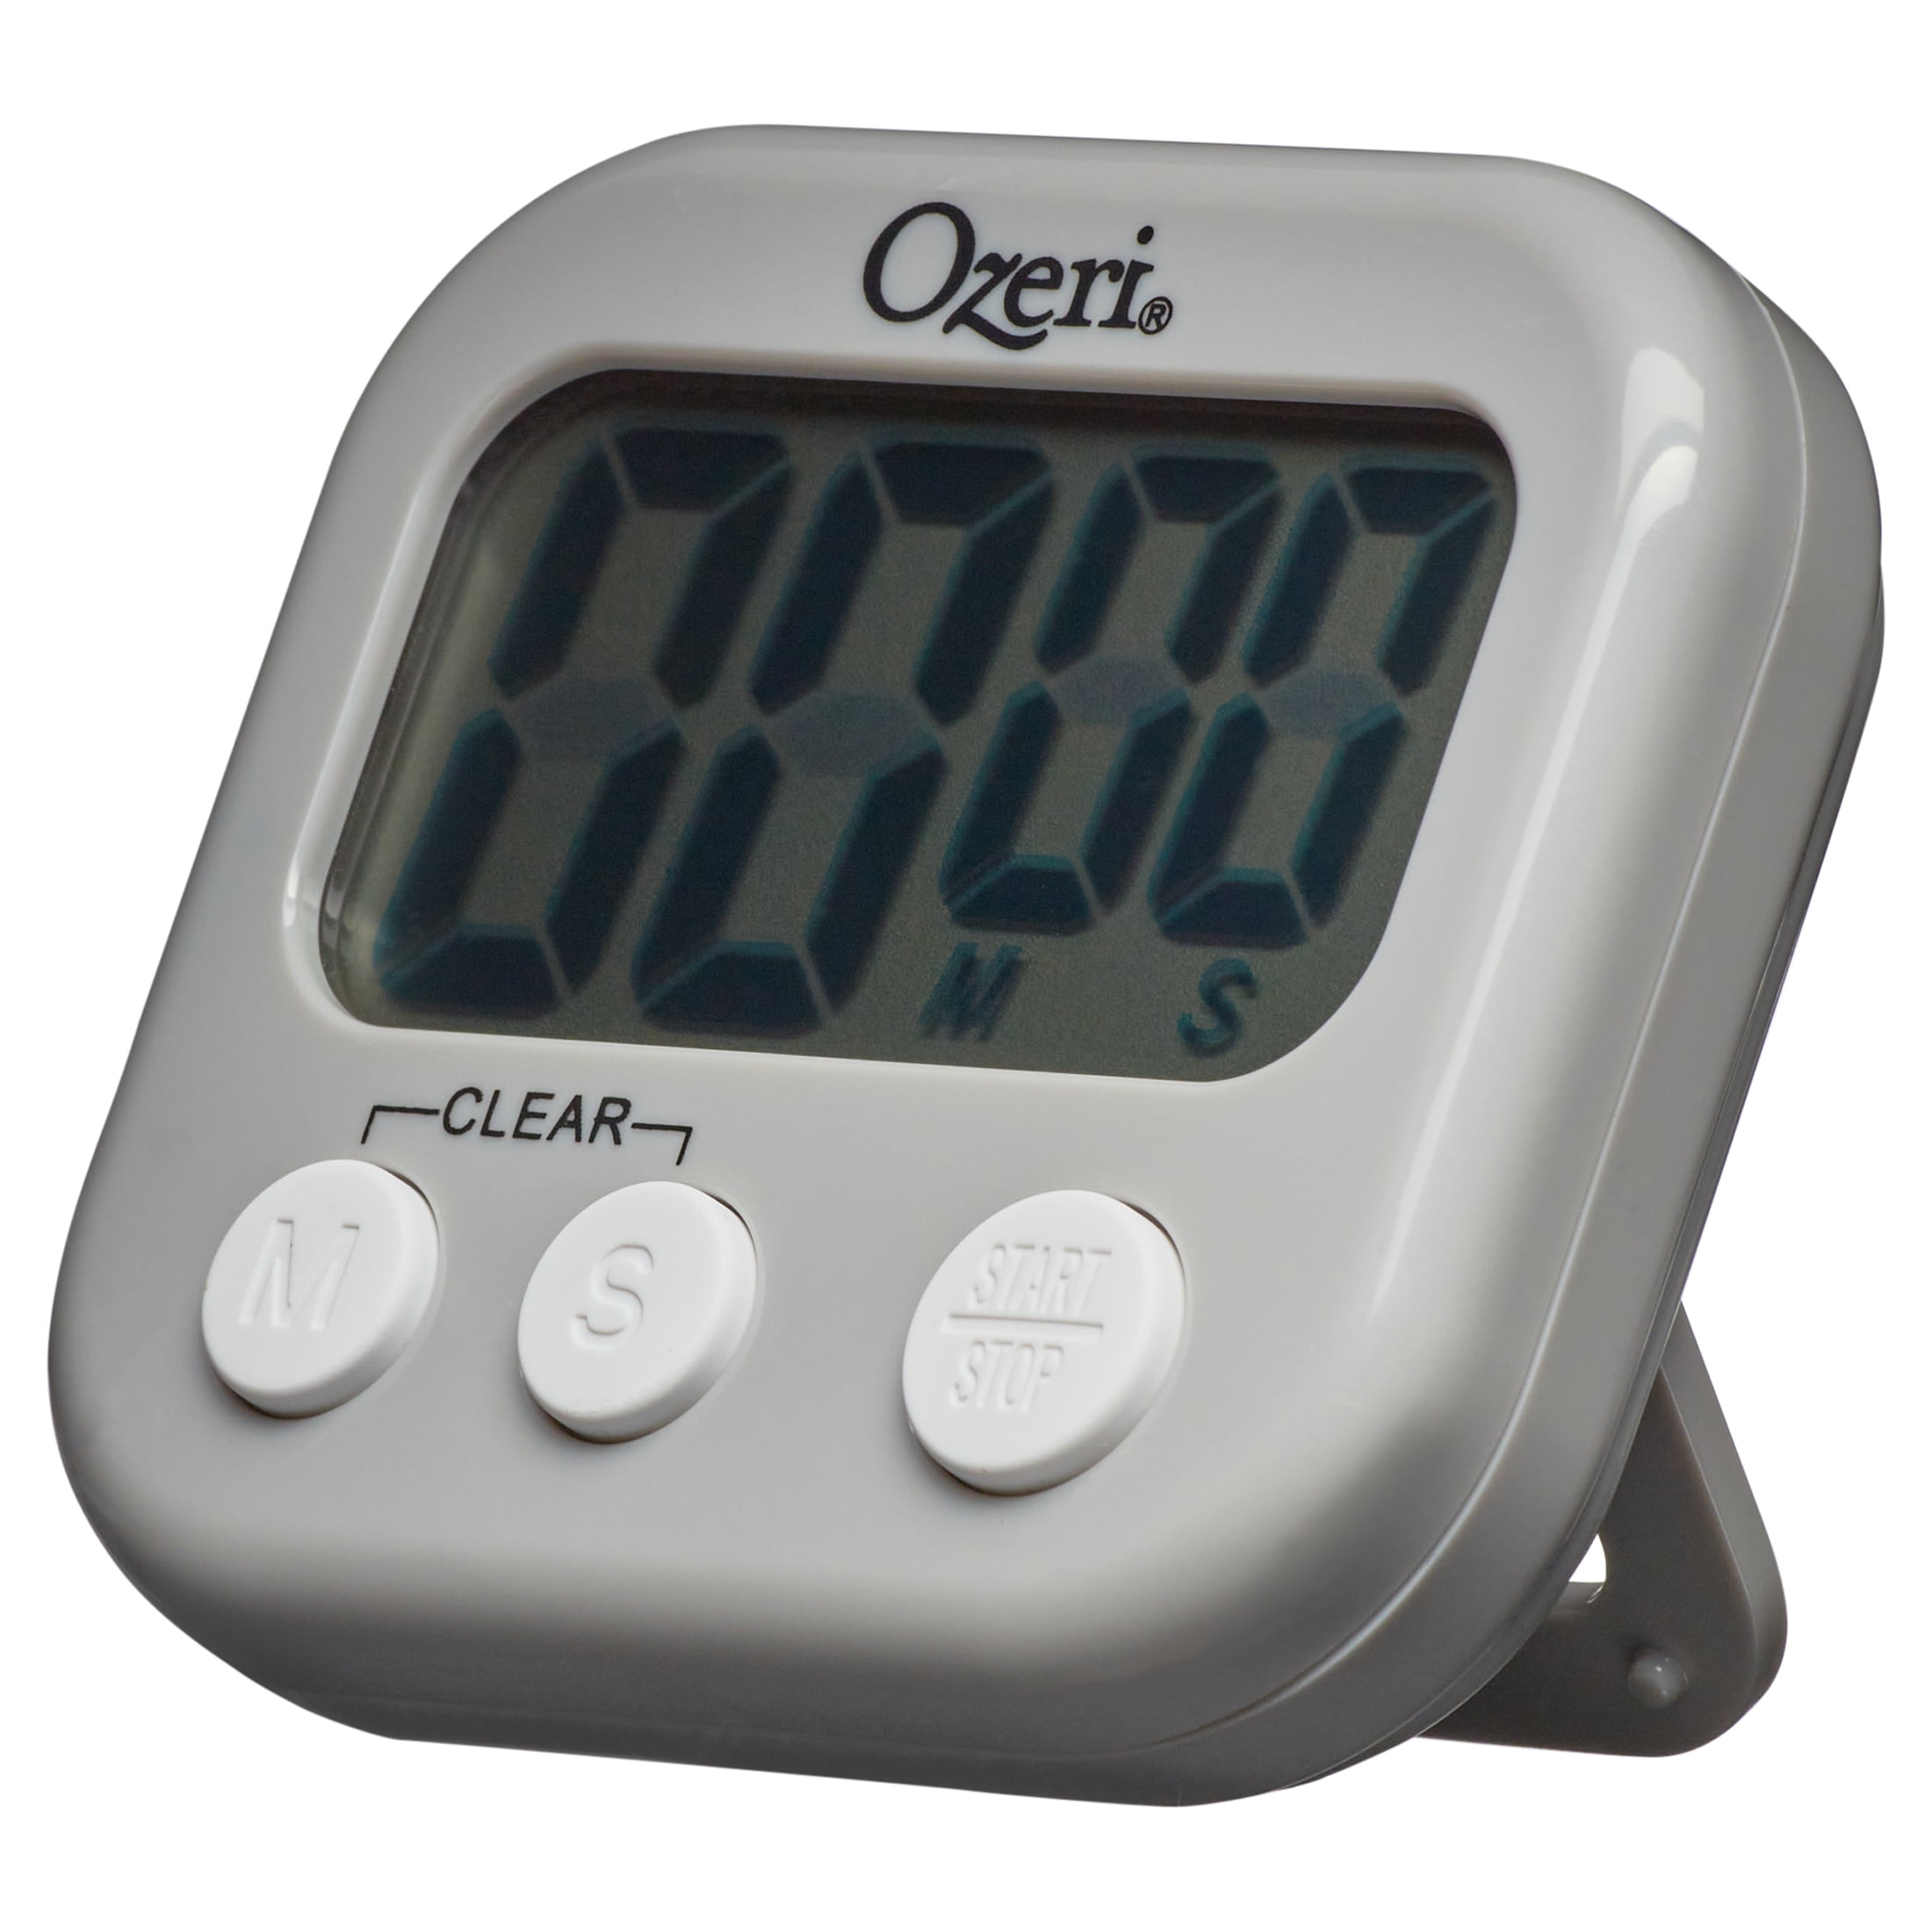 Ozeri The Kitchen and Event Timer, White